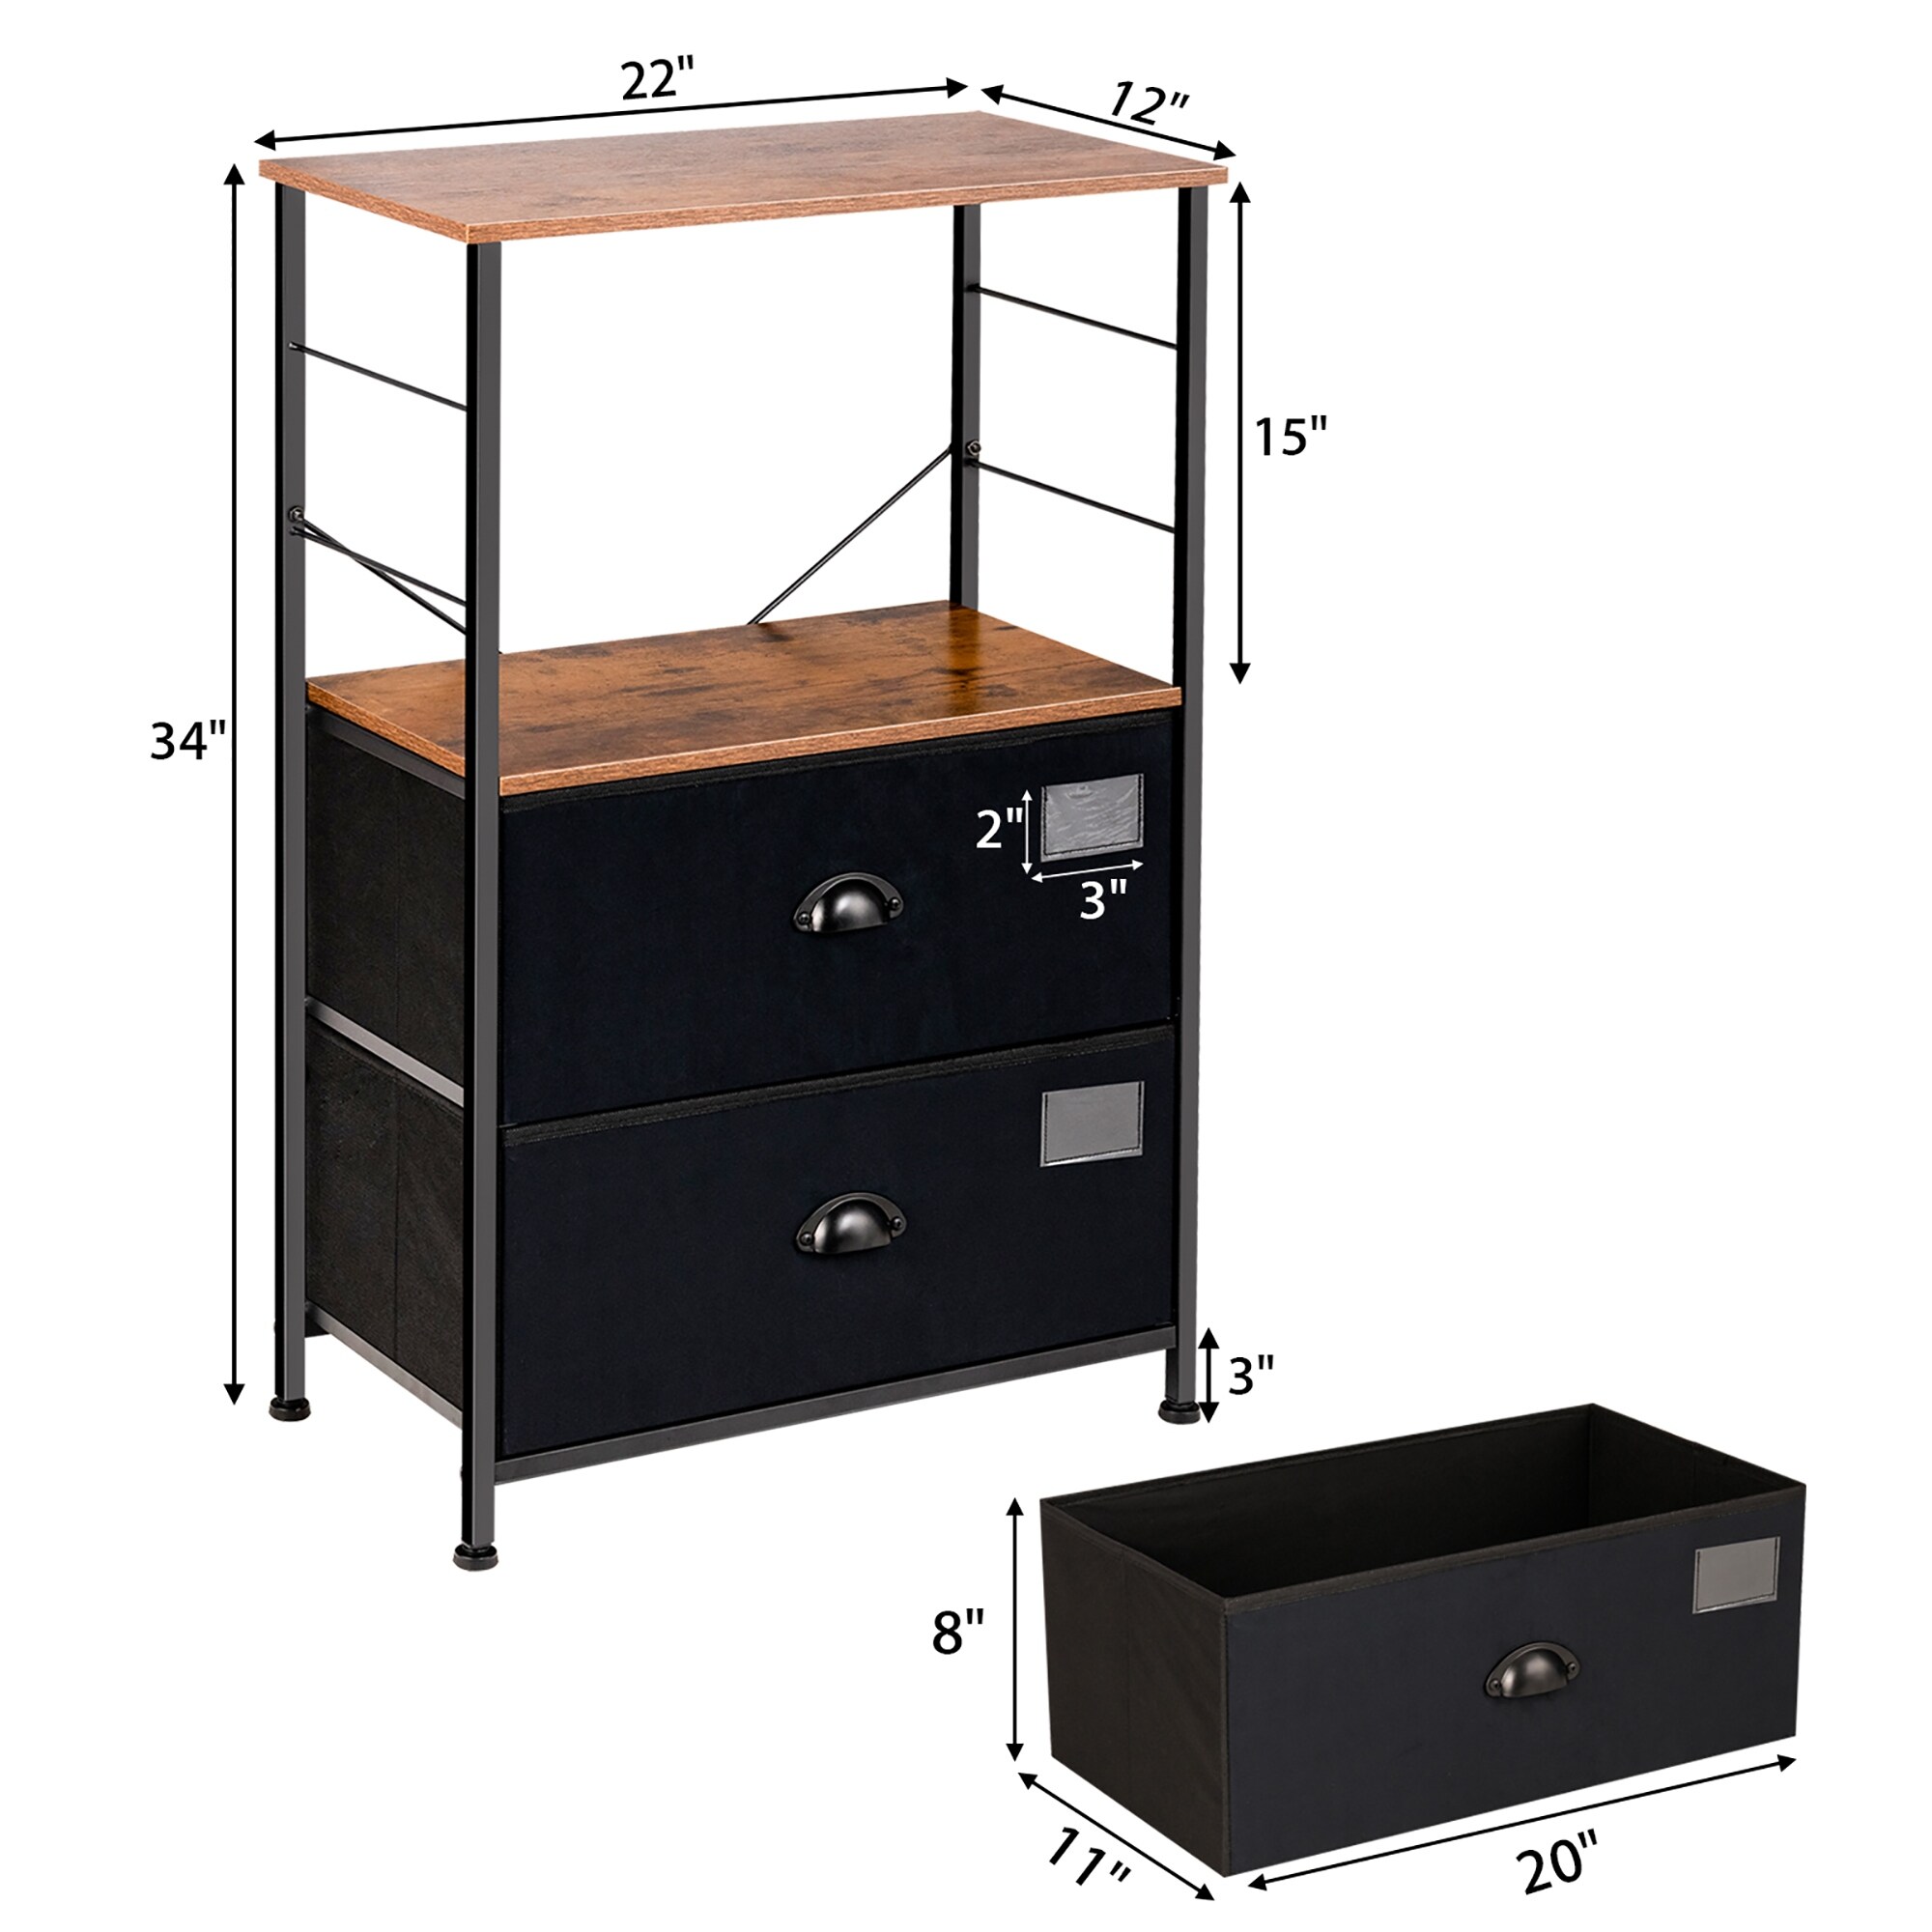 https://ak1.ostkcdn.com/images/products/is/images/direct/a4db925eb2c43c1b6628237c1d1fdab6a9c6cdef/Costway-2-Drawer-Dresser-w-Shelf-Storage-Tower-Nightstand-End-Table.jpg